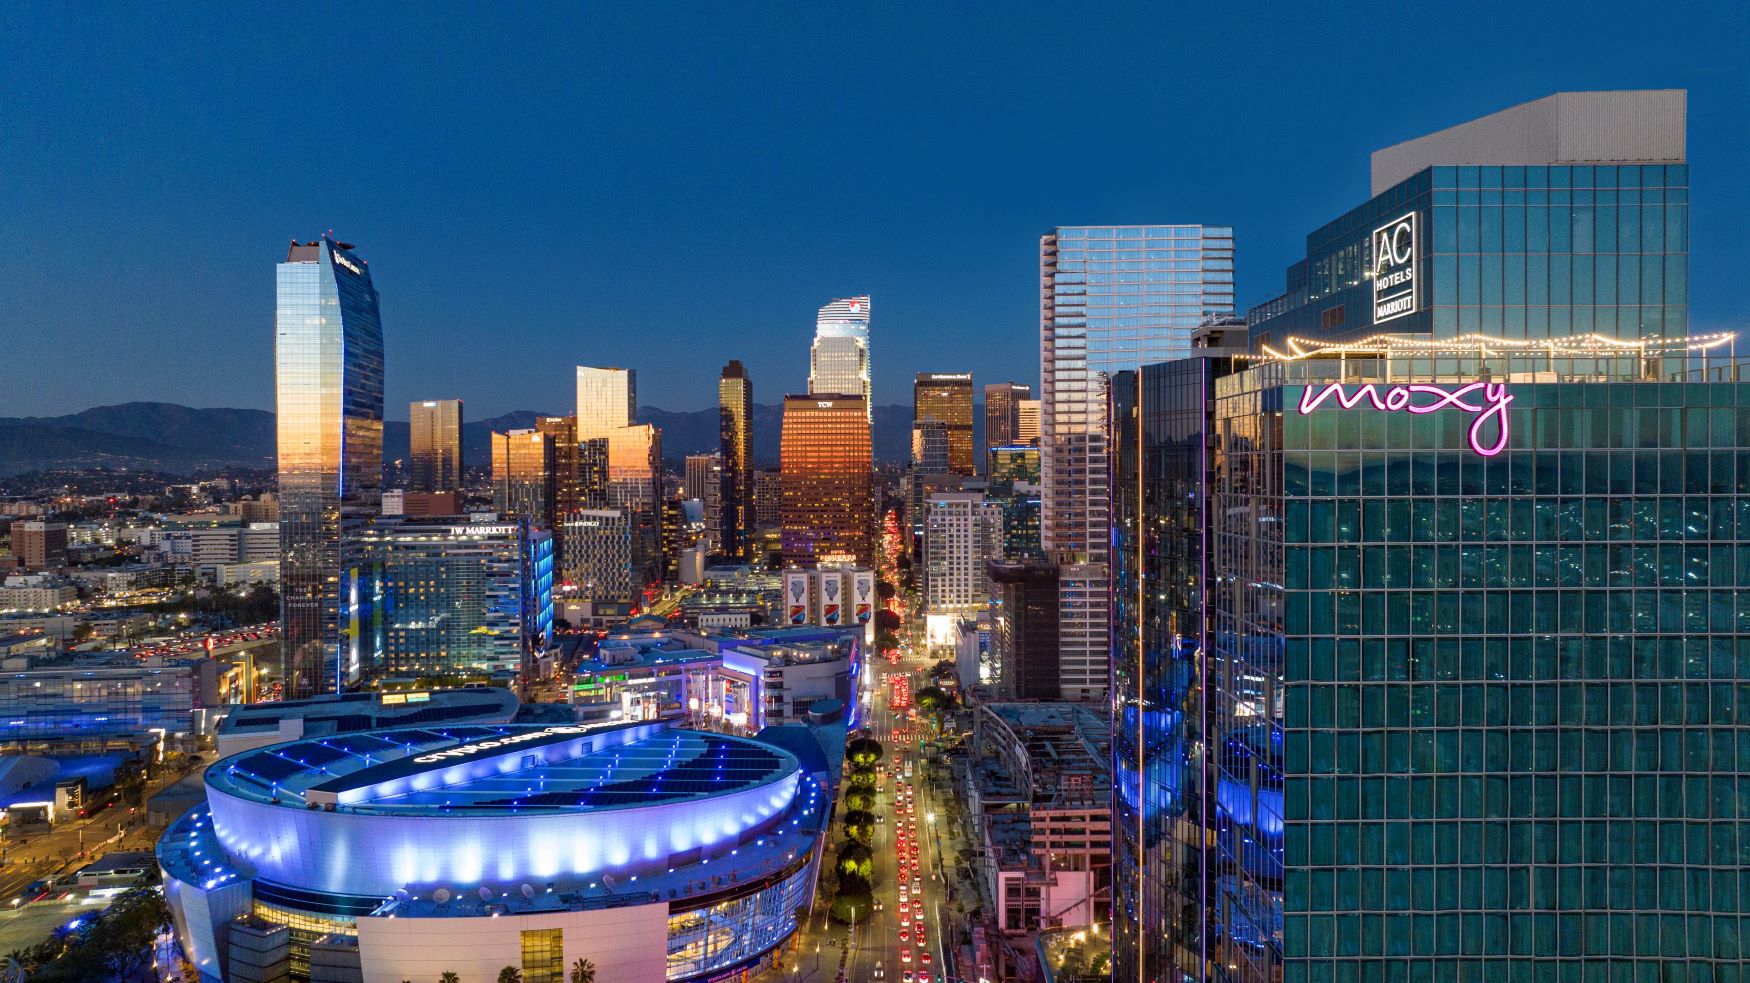 An image of the Moxy Hotel and the DTLA landscape.